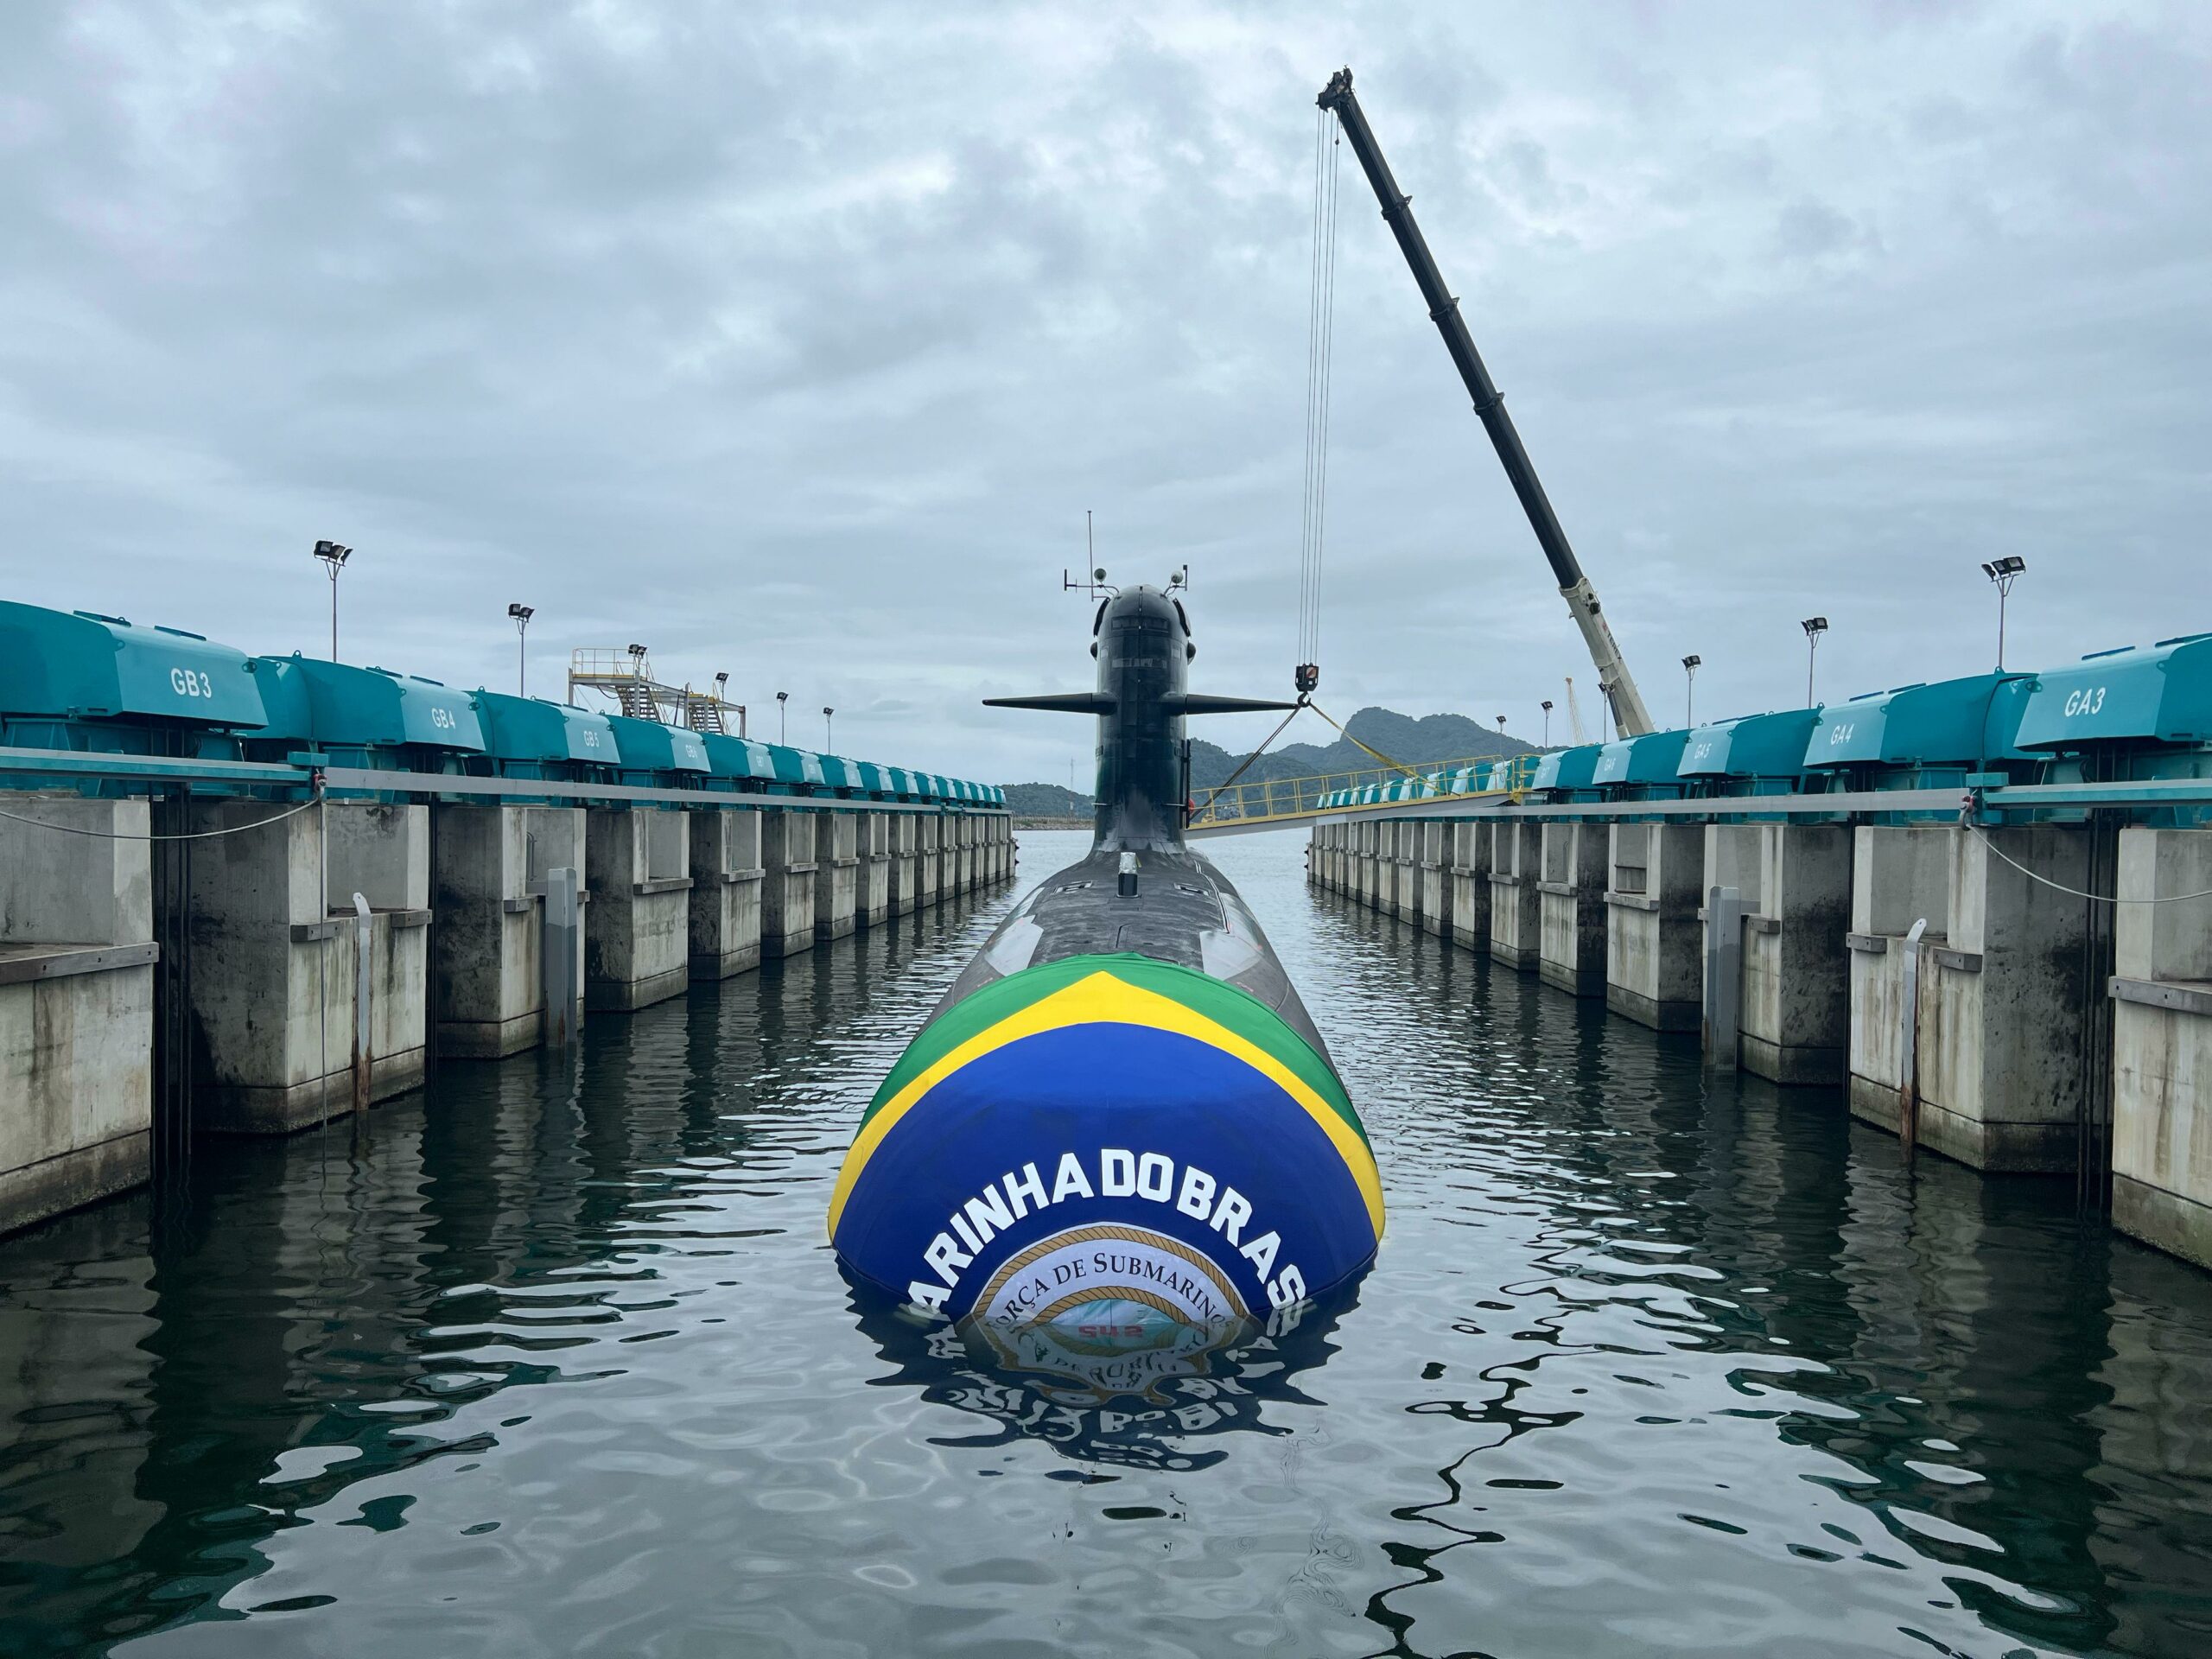 The Tonelero (S42), Brazil's third Riachuelo-class submarine, is seen half-submerged in a pier. Its front is wrapped in clothing with Brazil's colors, as well as the Brazilian Navy's logo in the center. The background is a dull sky covered in dark clouds.